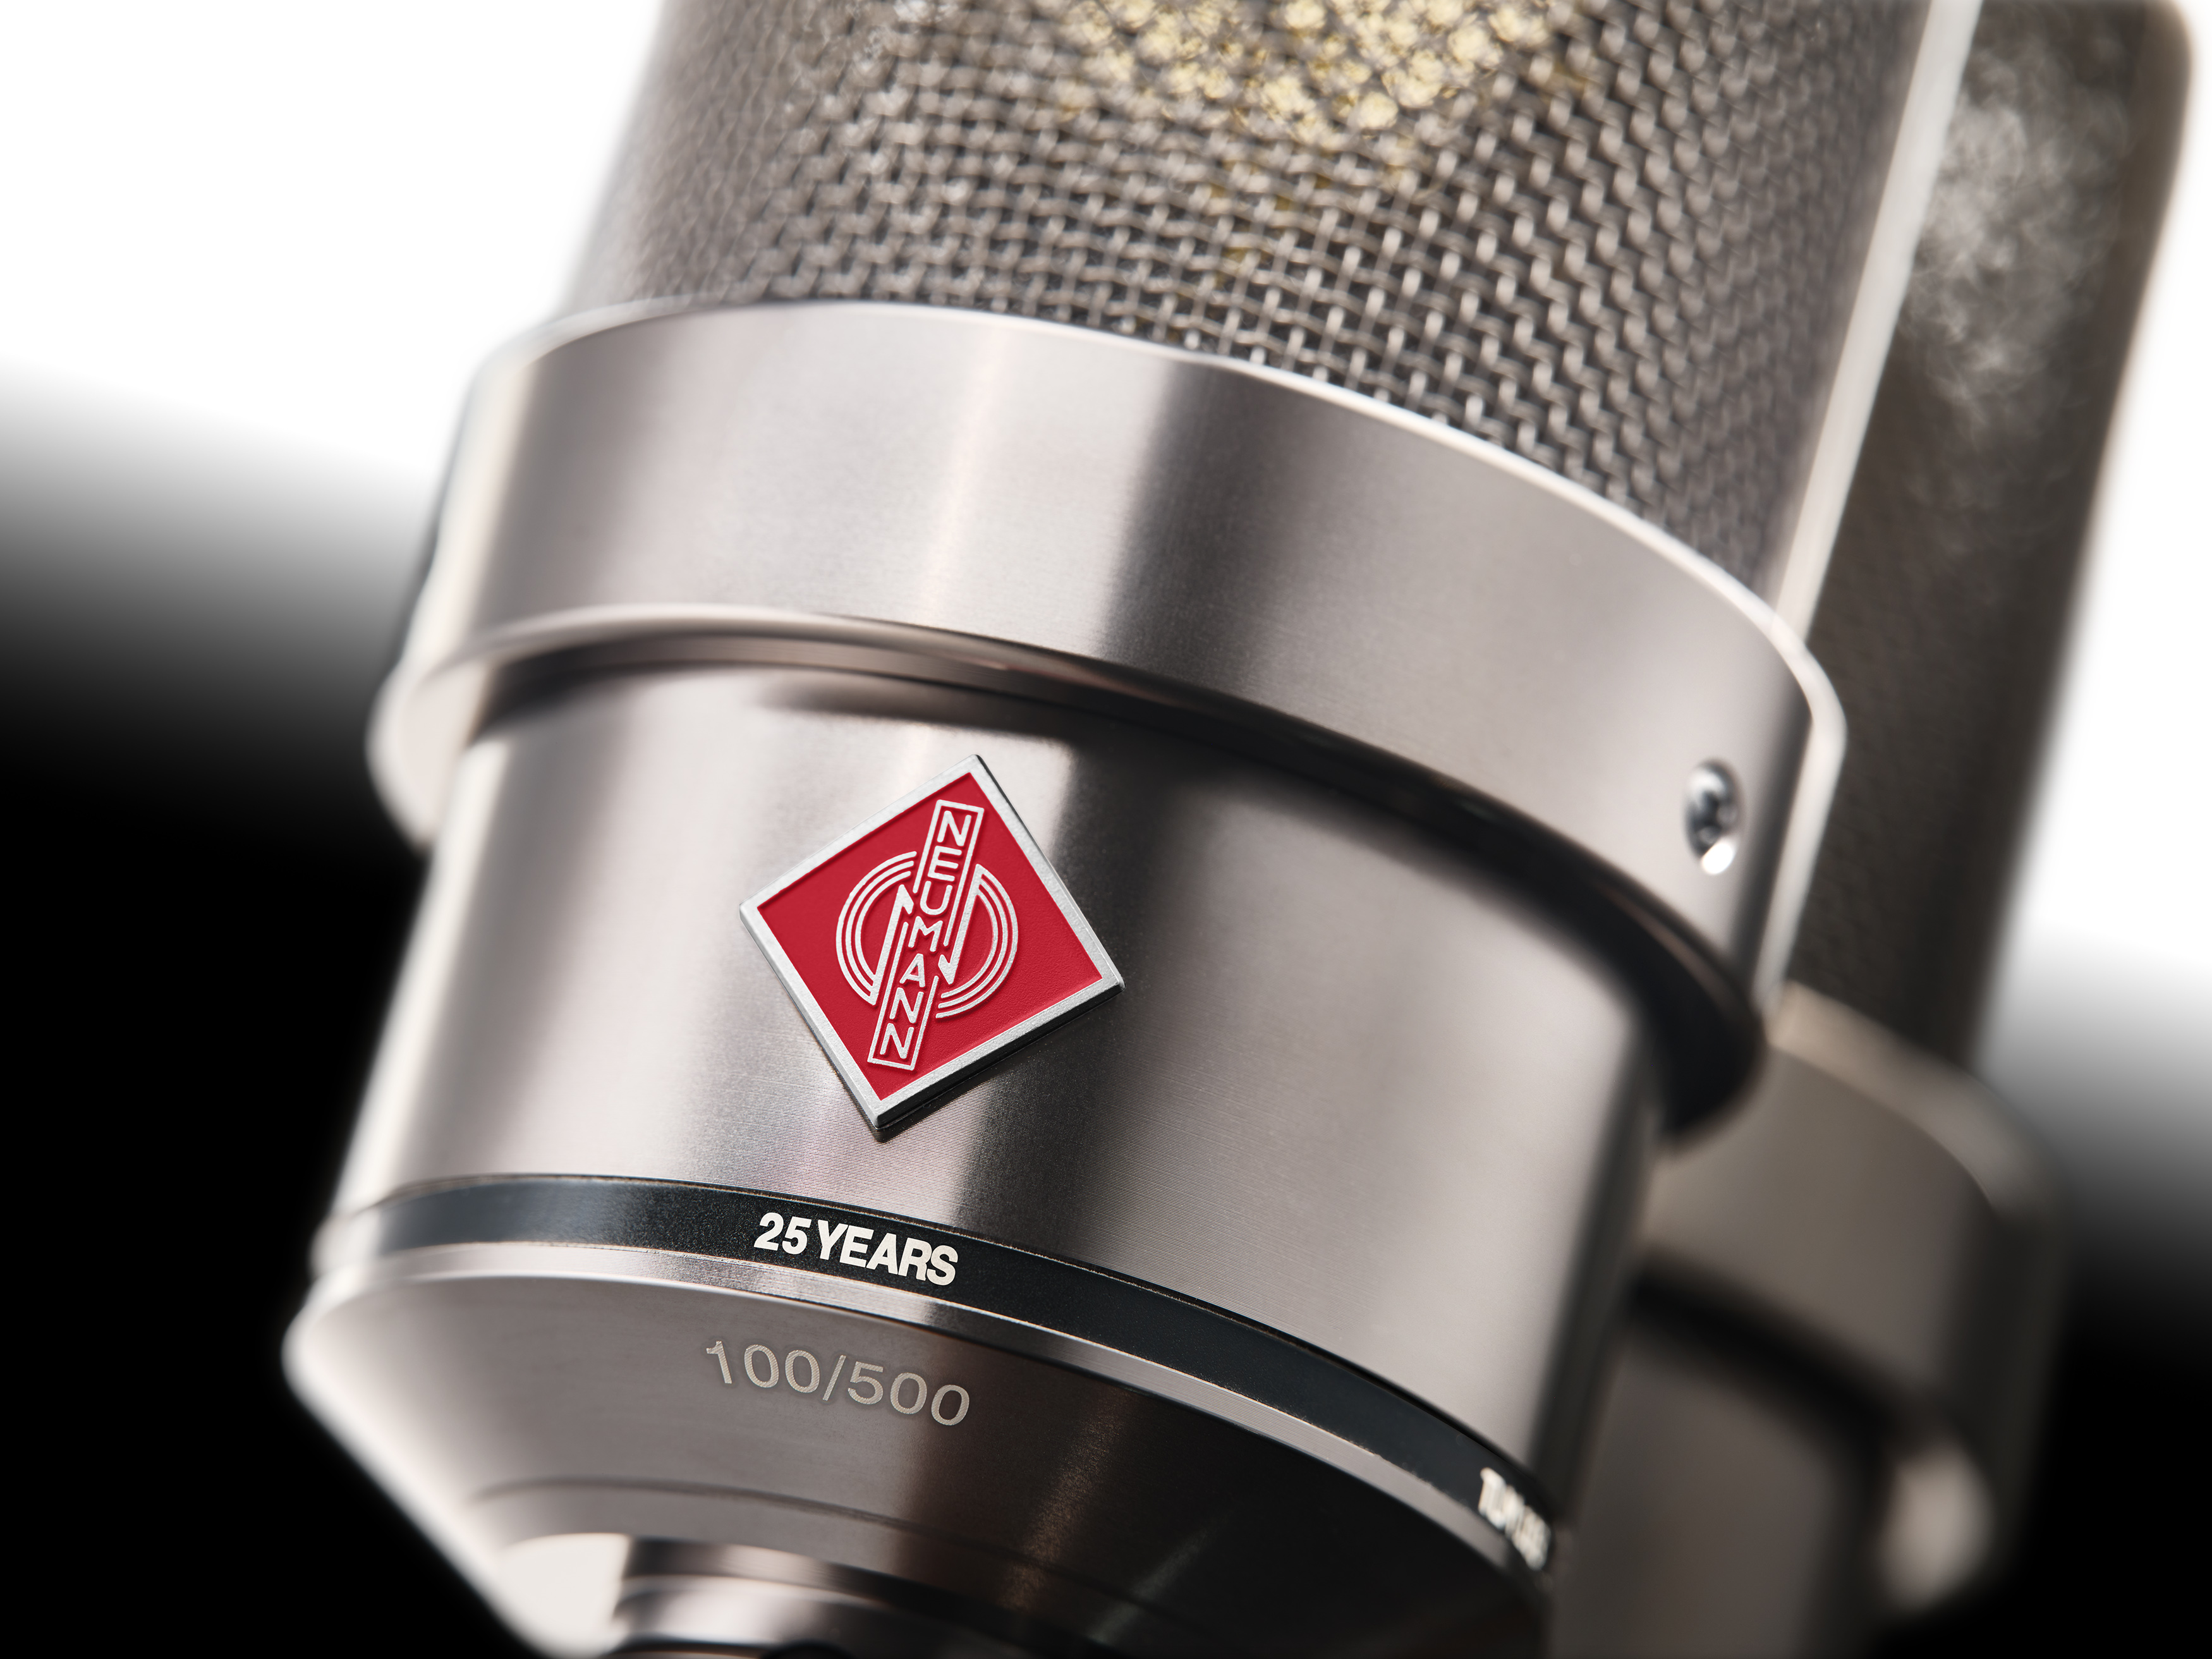 Neumann Tlm 103 25 Years Edition - Micro Statique Large Membrane - Variation 2